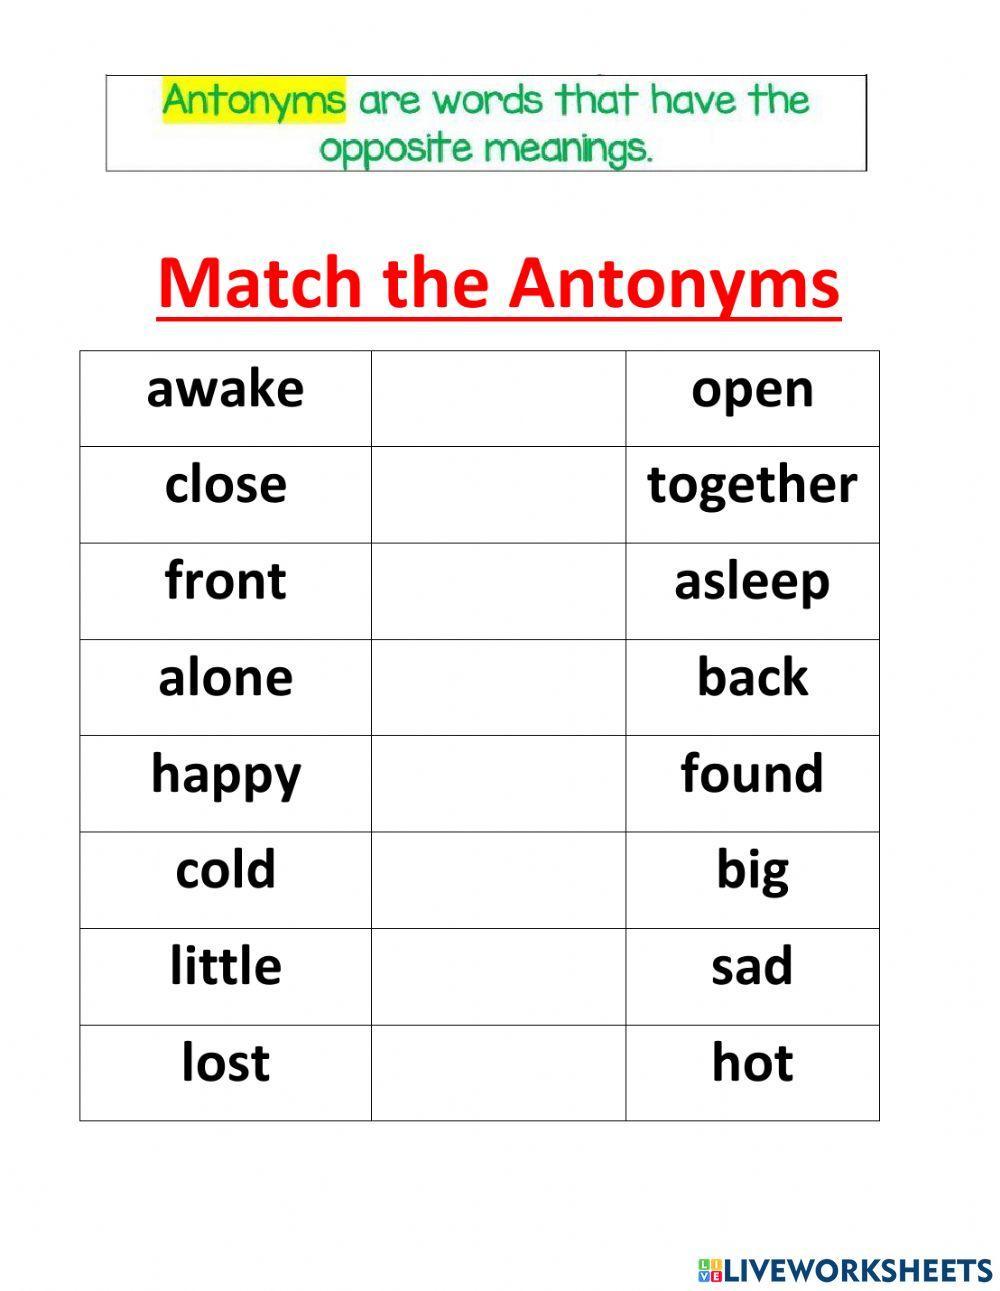 Antonyms and Synonyms